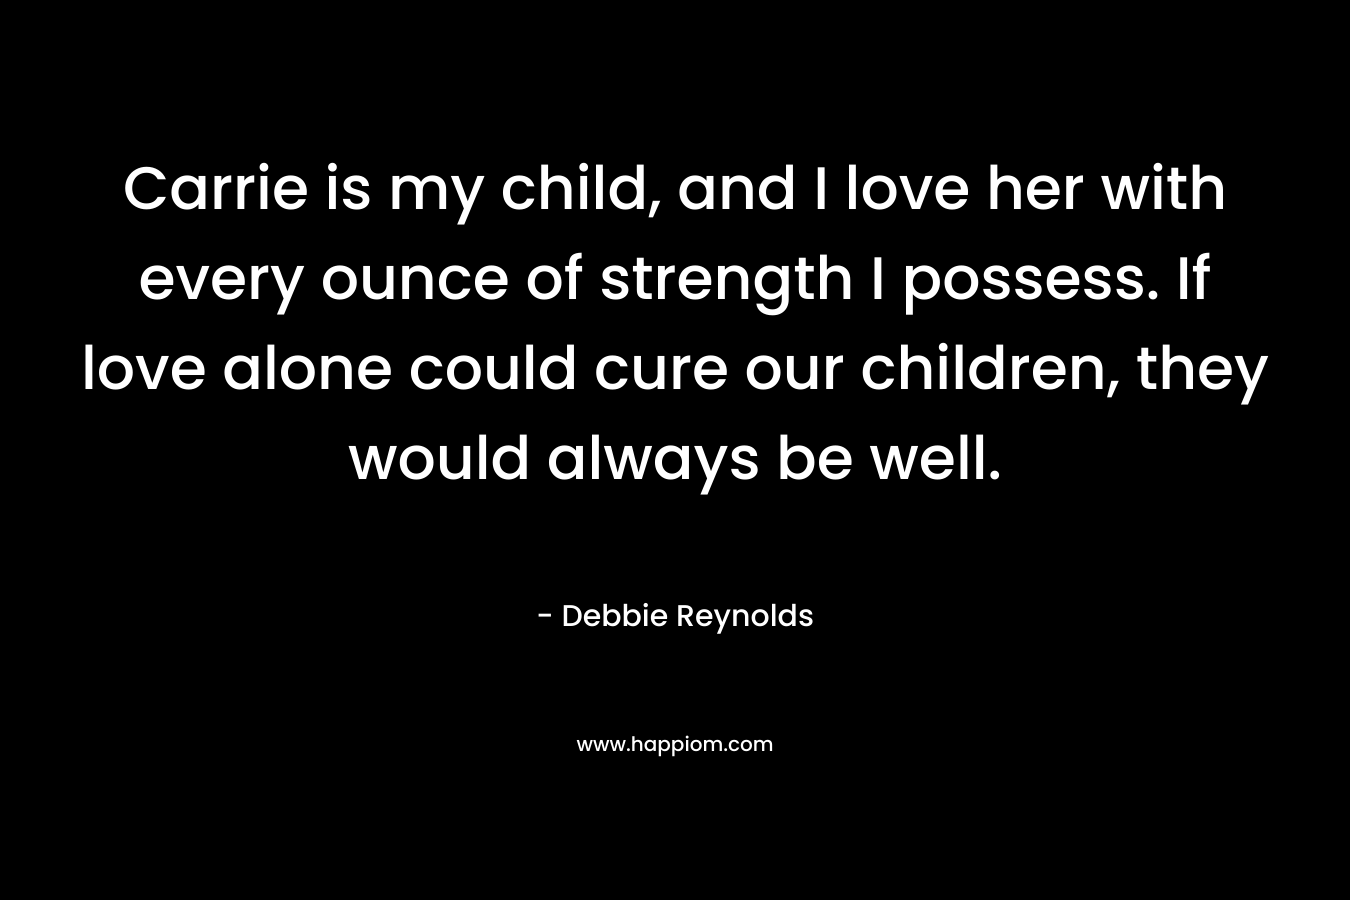 Carrie is my child, and I love her with every ounce of strength I possess. If love alone could cure our children, they would always be well.